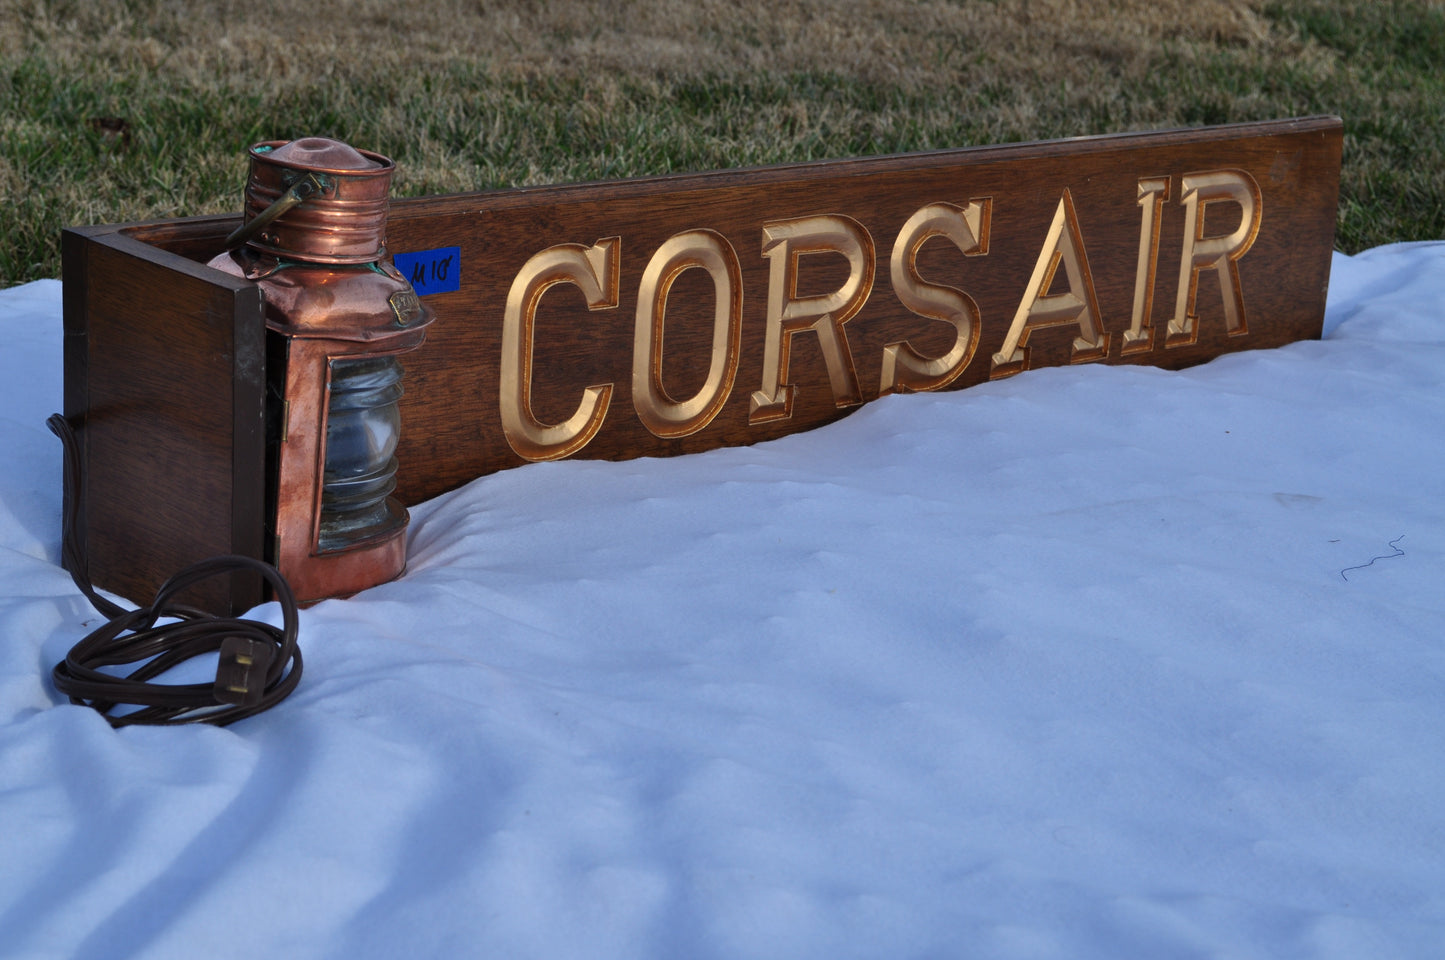 Quarter Board, "Corsair", with Tung Woo Starboard Light - Annapolis Maritime Antiques